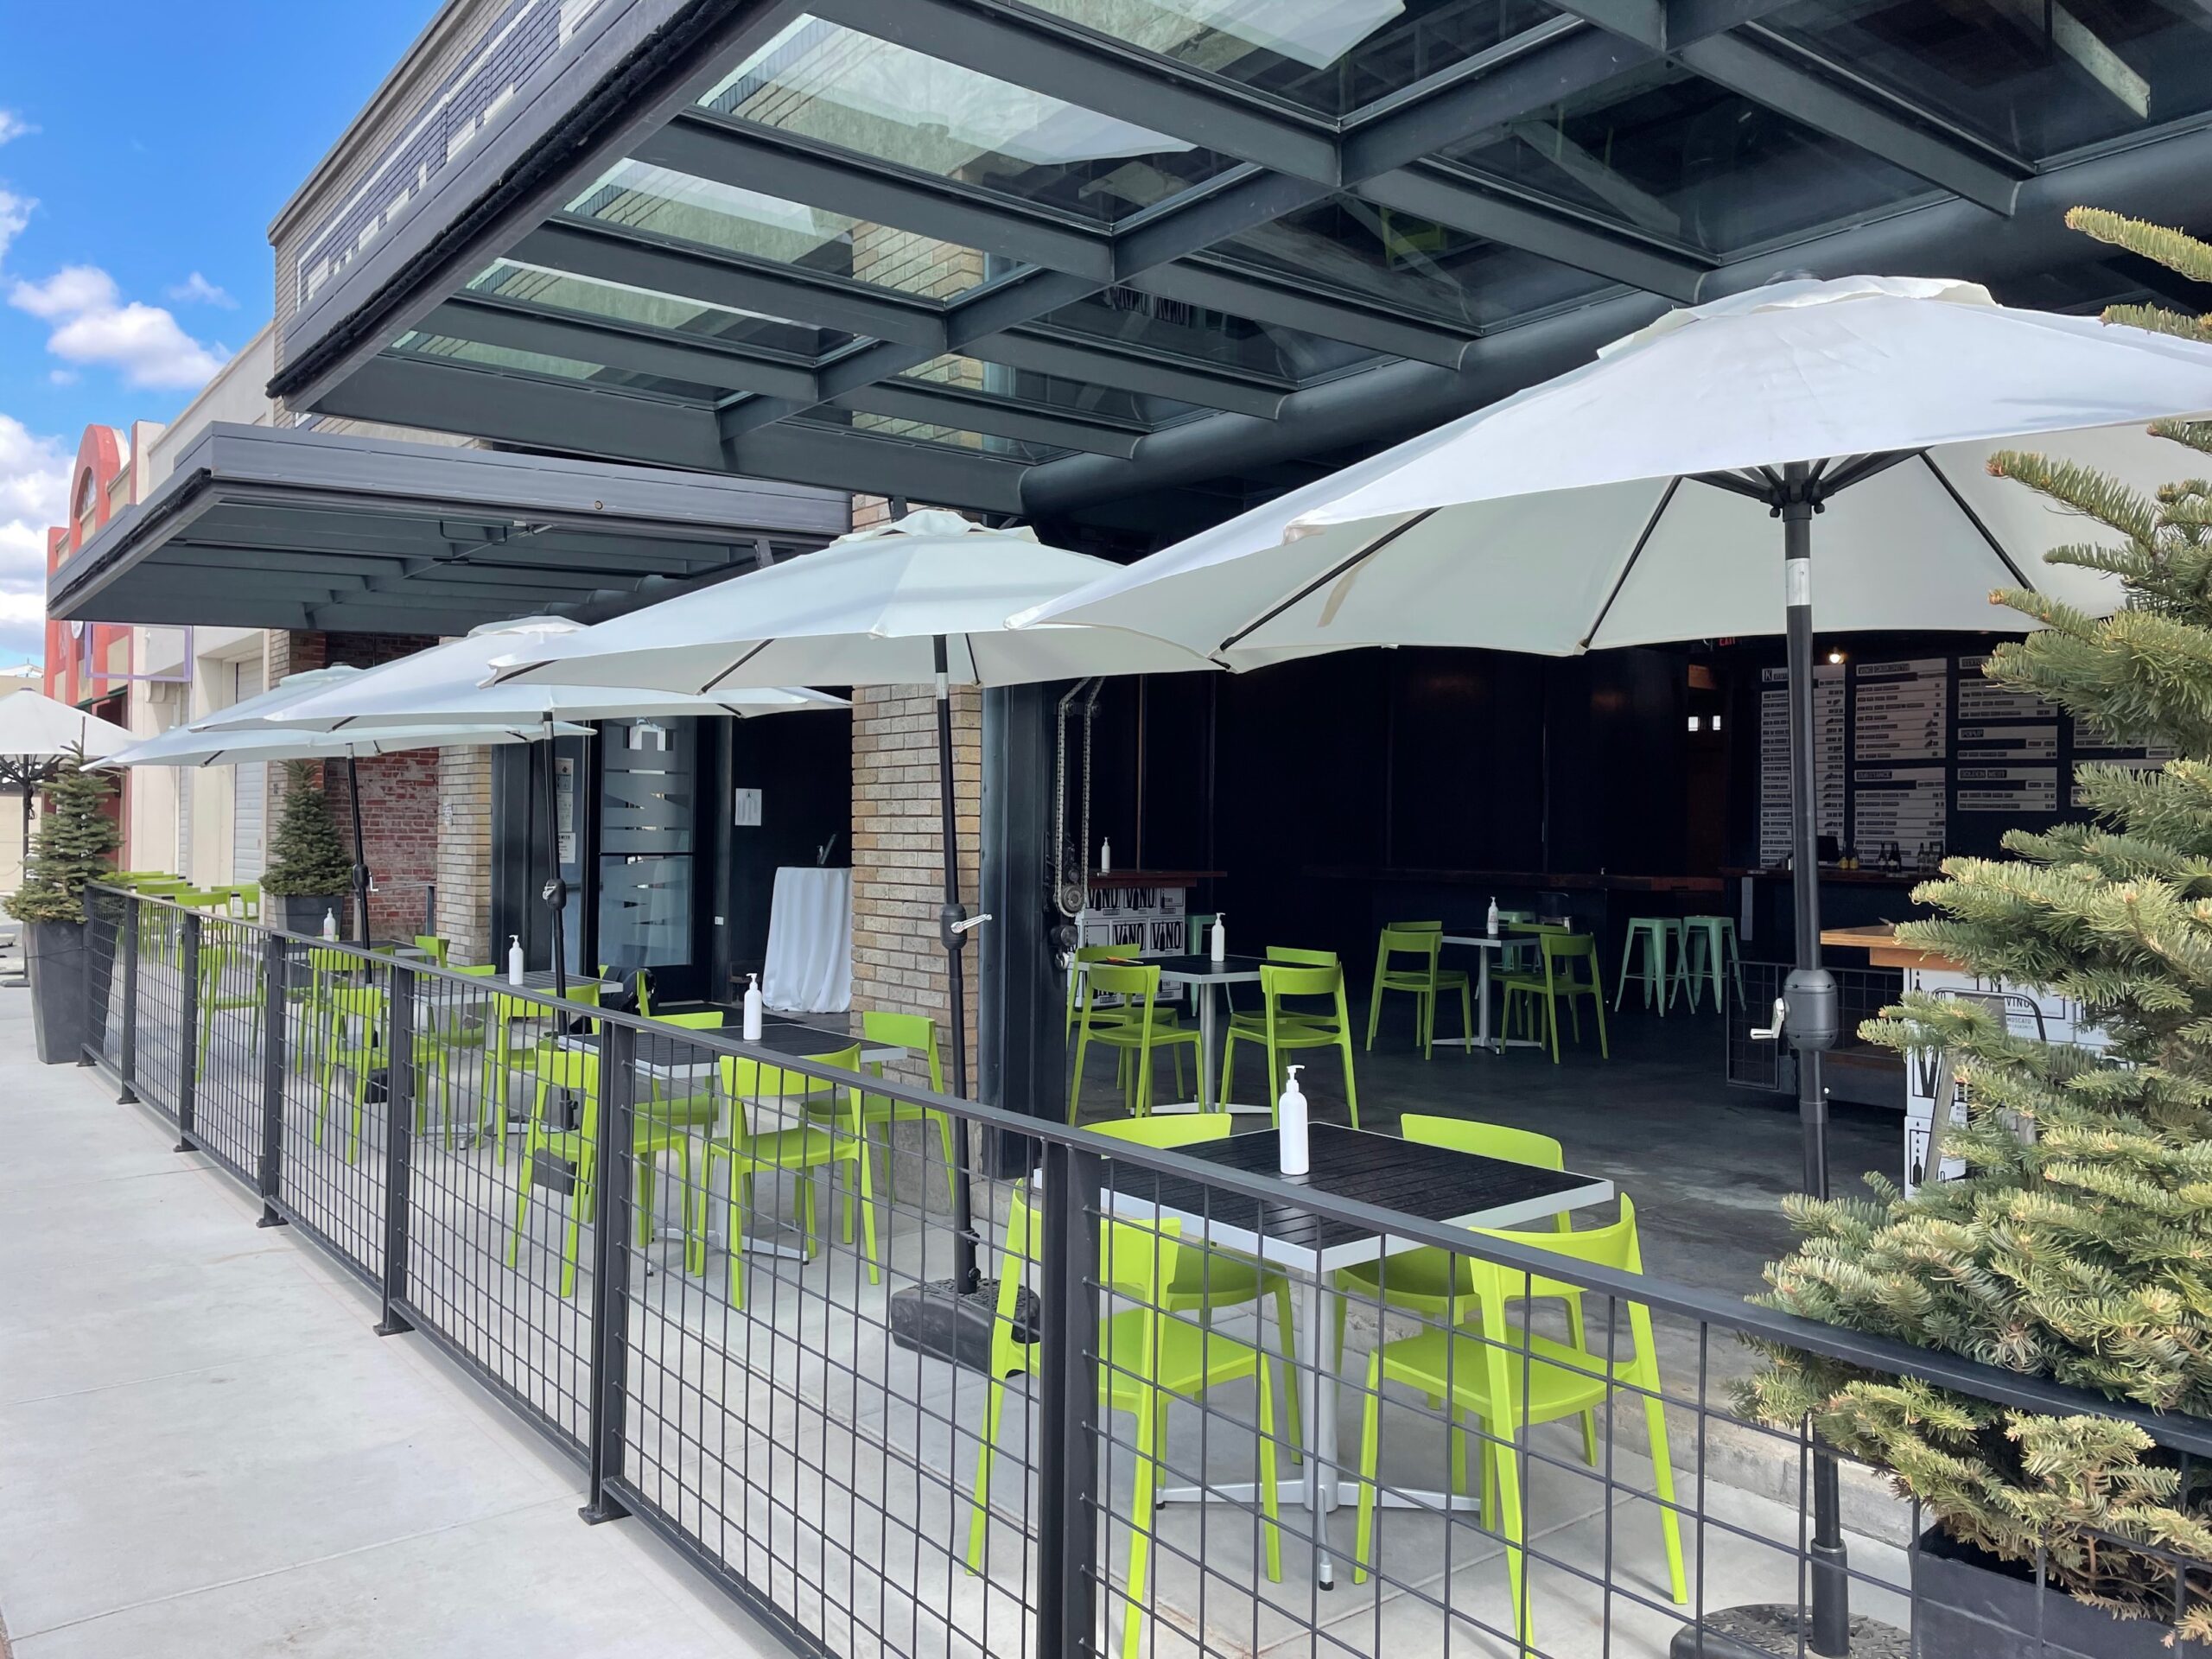 A view from the front of our Walla Walla Downtown tasting room. Showing blue sky, the garage door open, and tables ouside/inside ready for wine tasting.